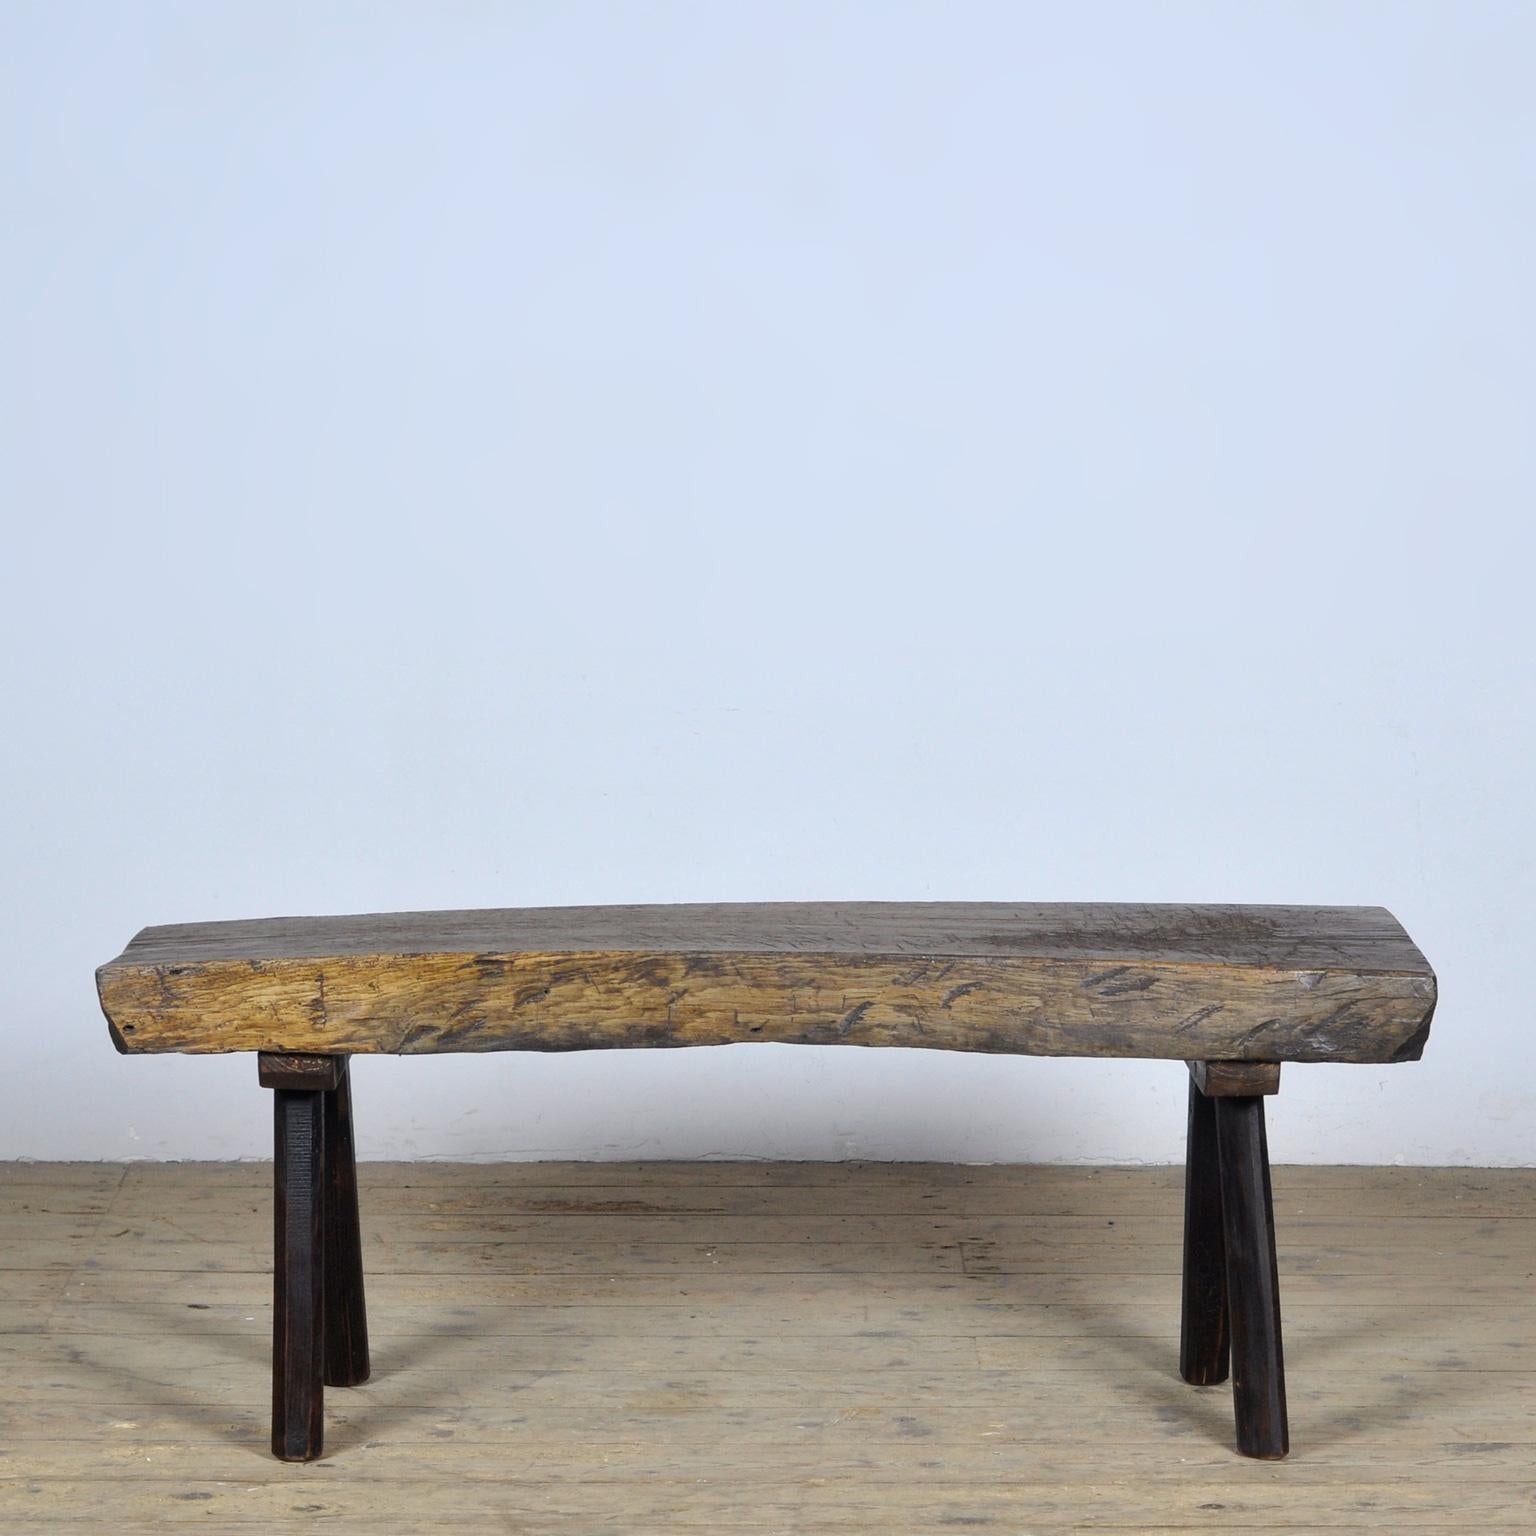 This oak butcher's farm table was produced in hungary around the 1920s. With an oak top of 10 cm thick. The legs are shortened to the ideal height for a coffee table or bench. Treated for woodworm. 